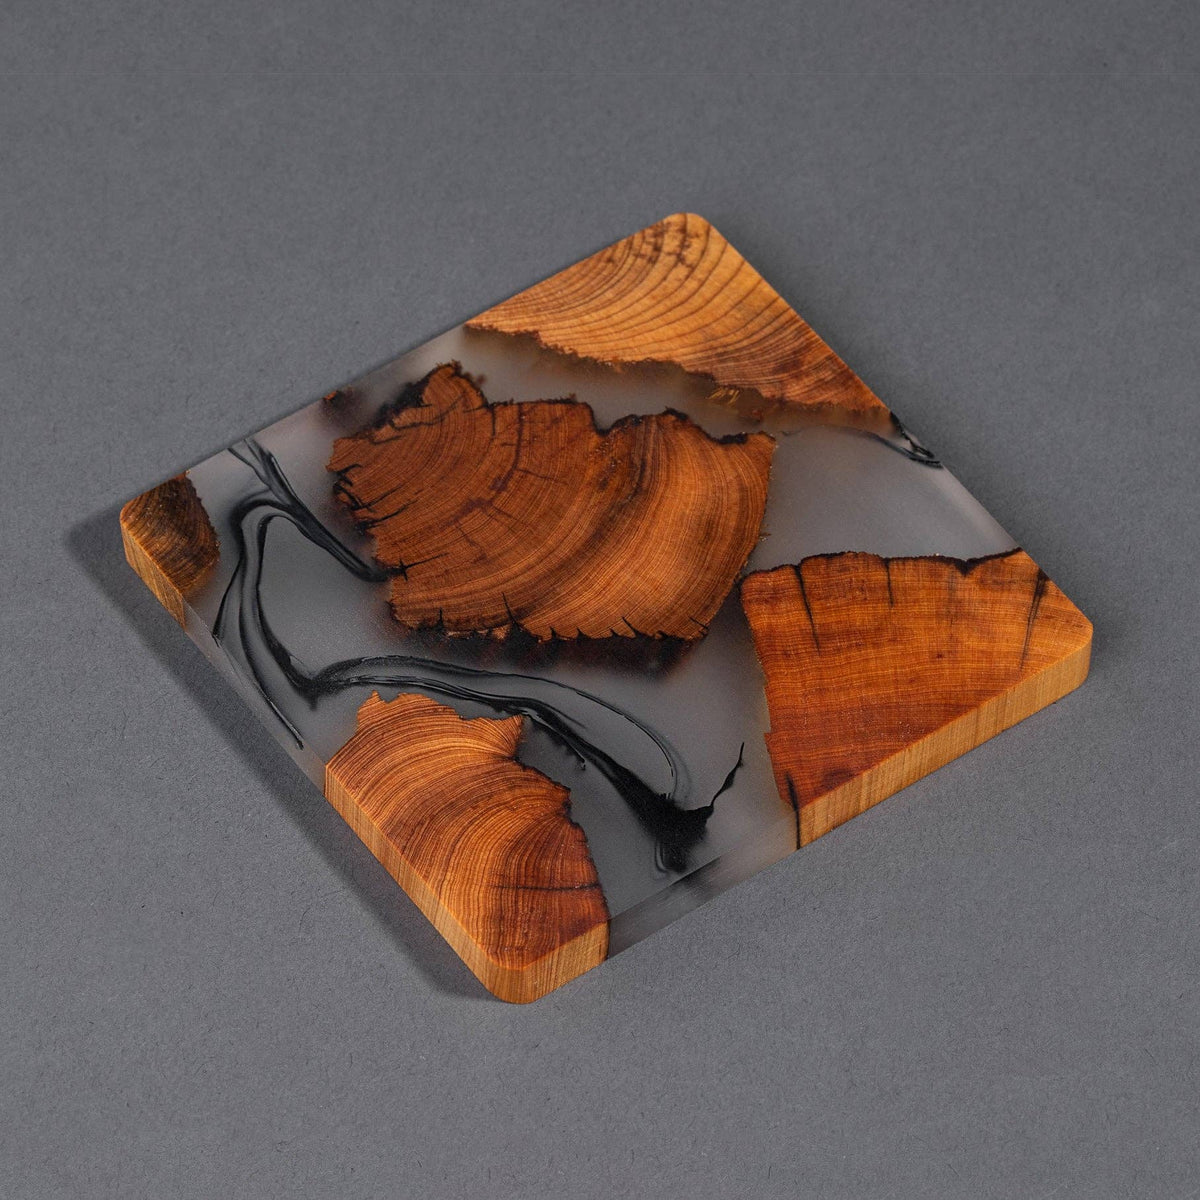 Season and Stir™ Handcrafted Cedar Coasters, Full Set of 6: with holder!